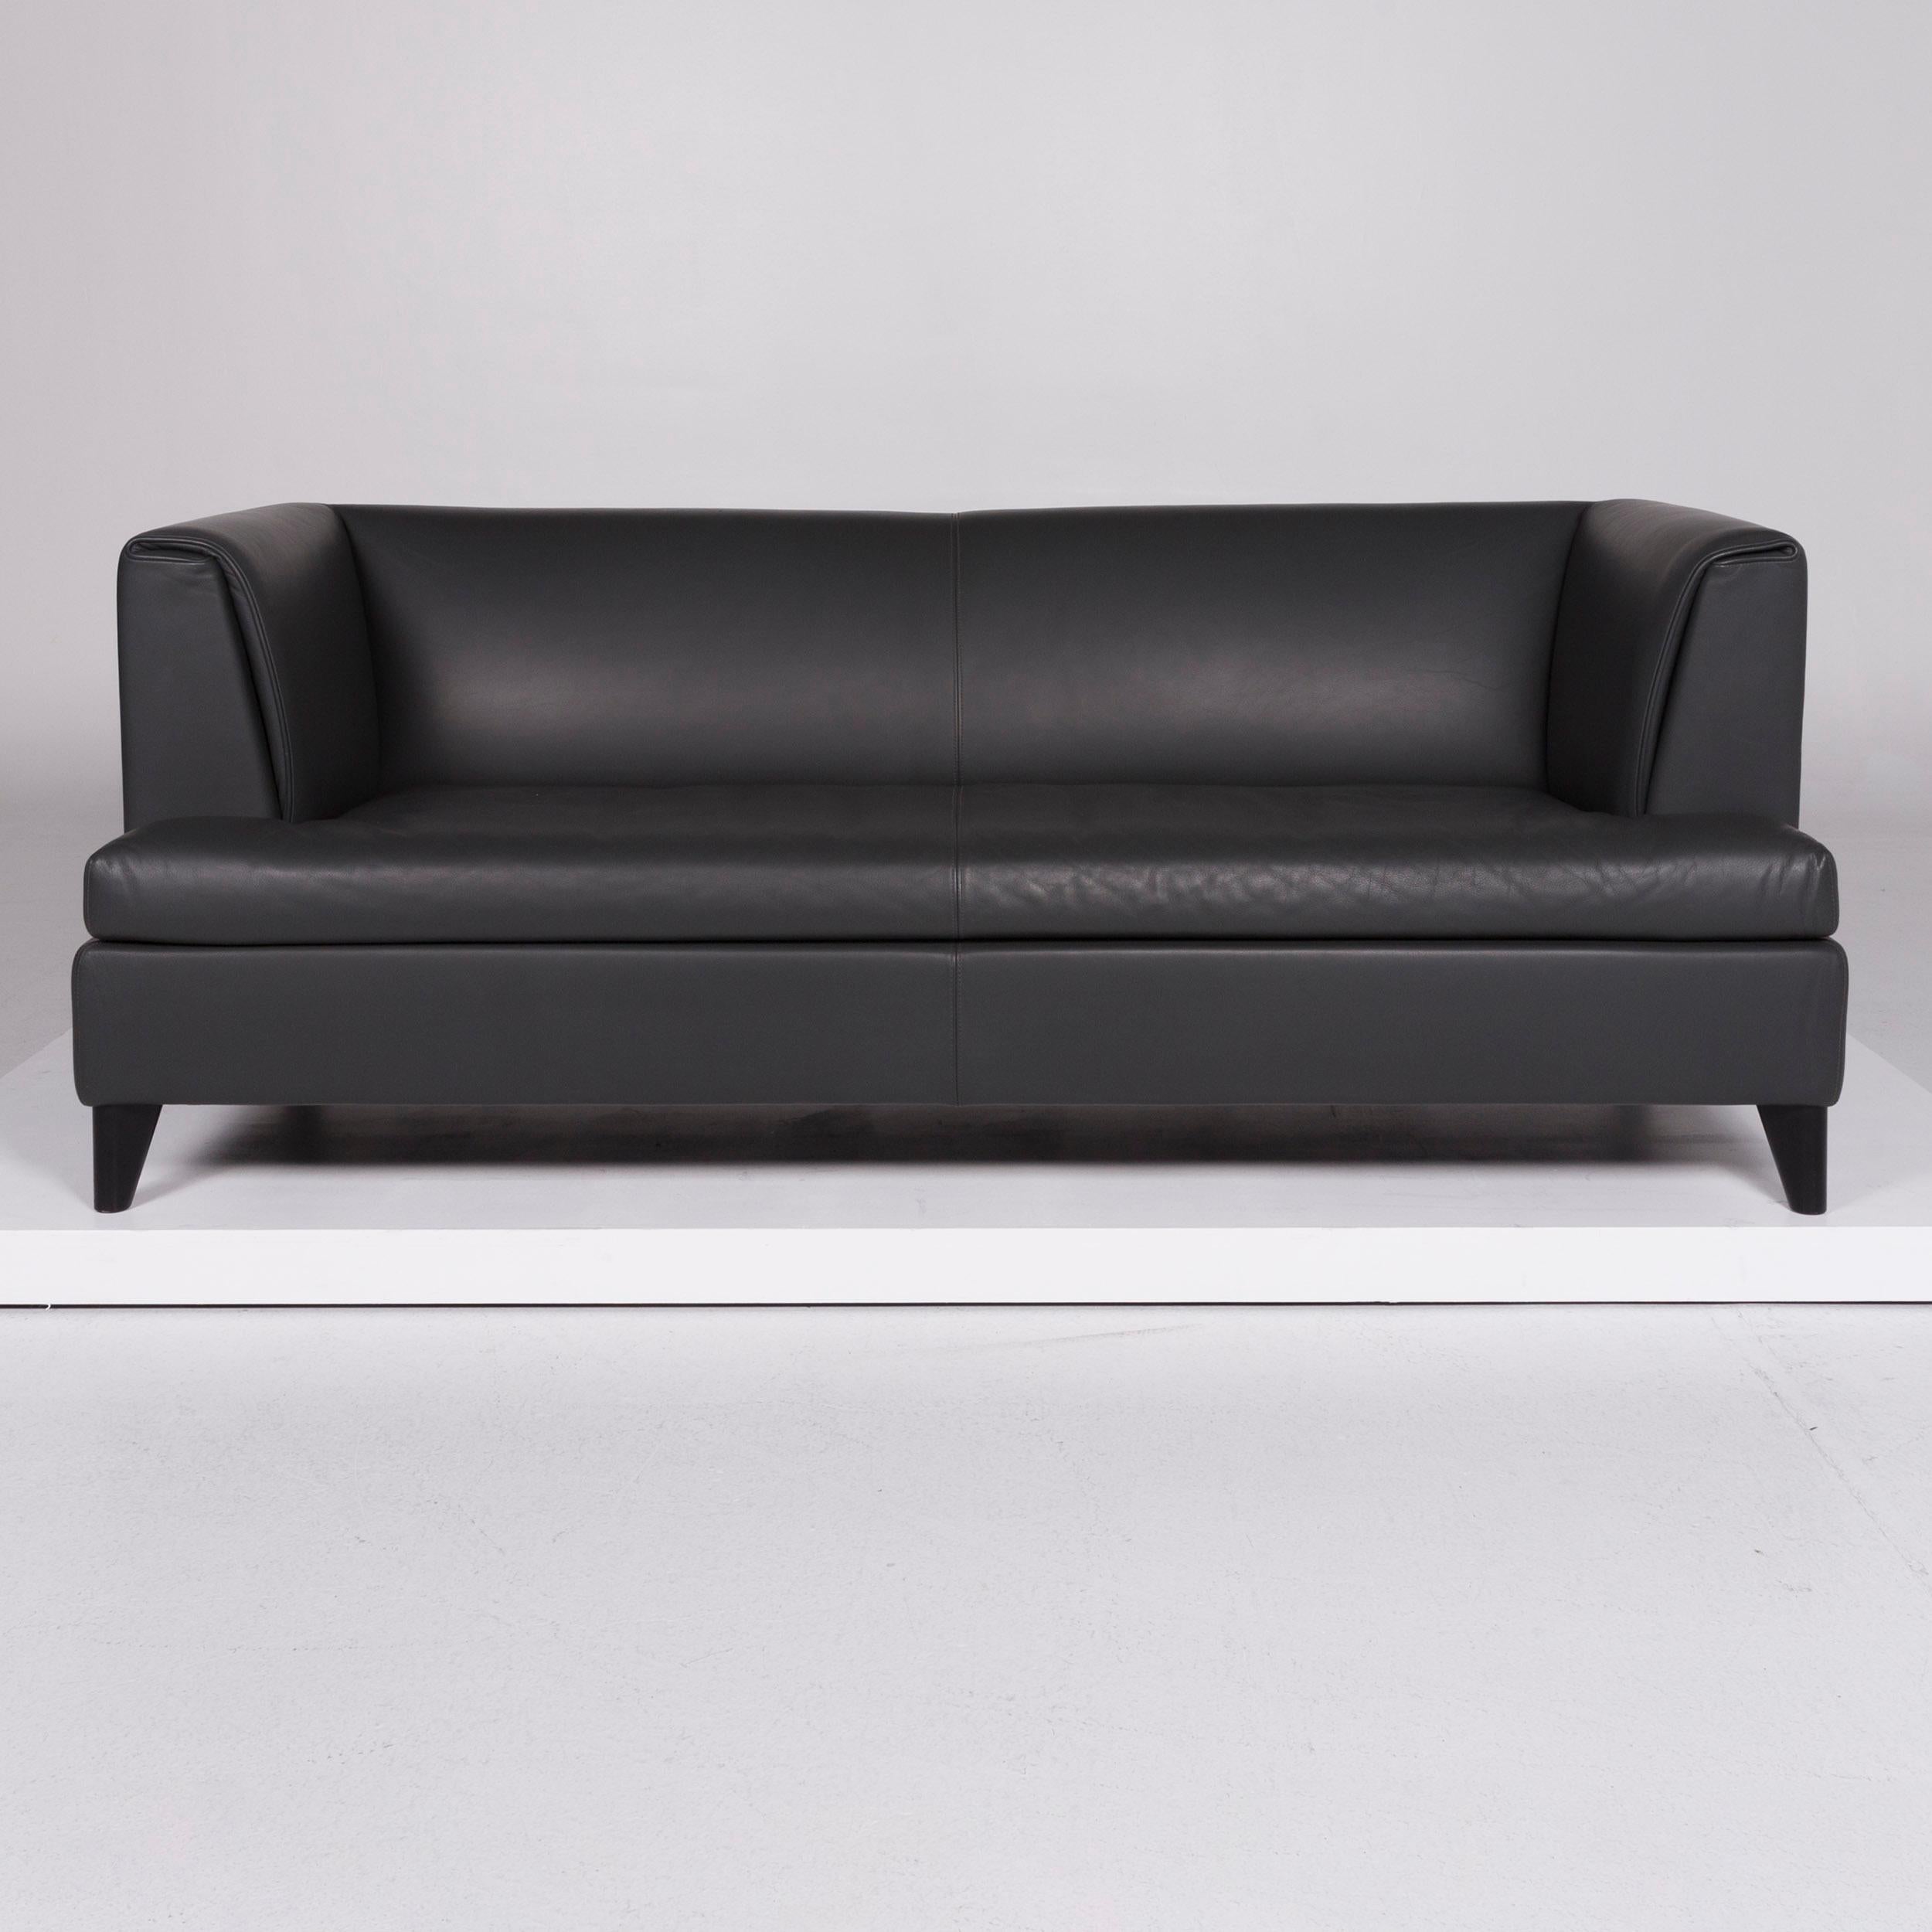 We bring to you a Wittmann Havana leather sofa set by Paolo Piva Gray three-seat armchair.
 
 Product measurements in centimeters:
 
Depth 86
Width 195
Height 74
Seat-height 41
Rest-height 73
Seat-depth 58
Seat-width 152
Back-height